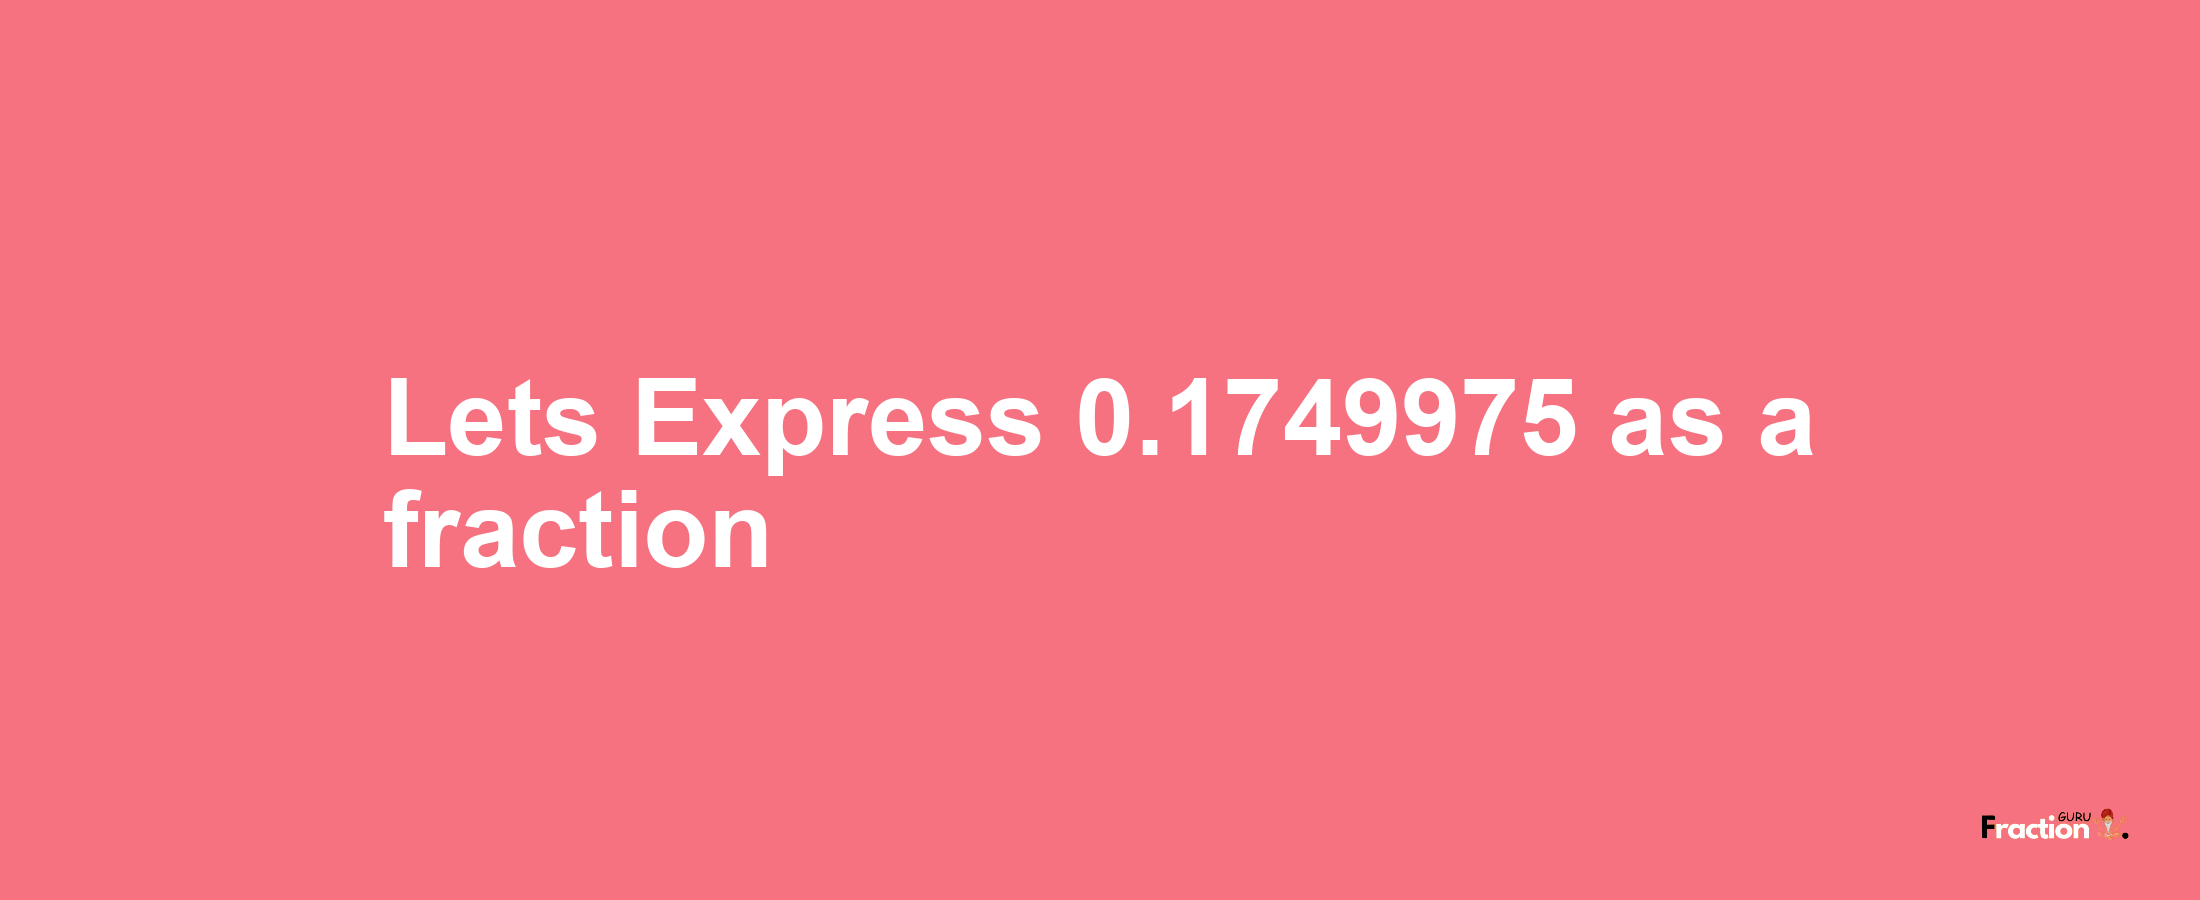 Lets Express 0.1749975 as afraction